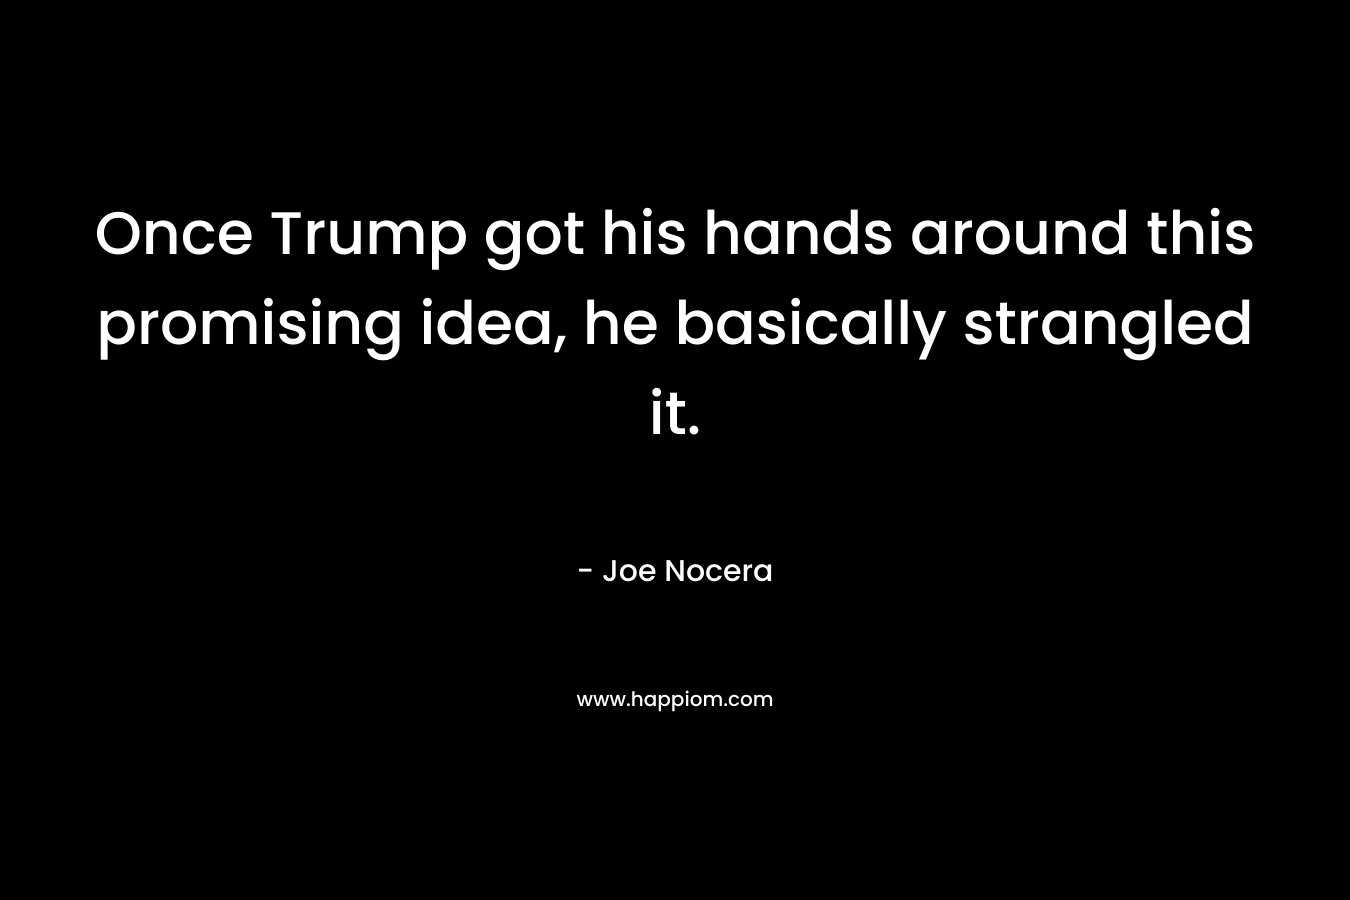 Once Trump got his hands around this promising idea, he basically strangled it. – Joe Nocera